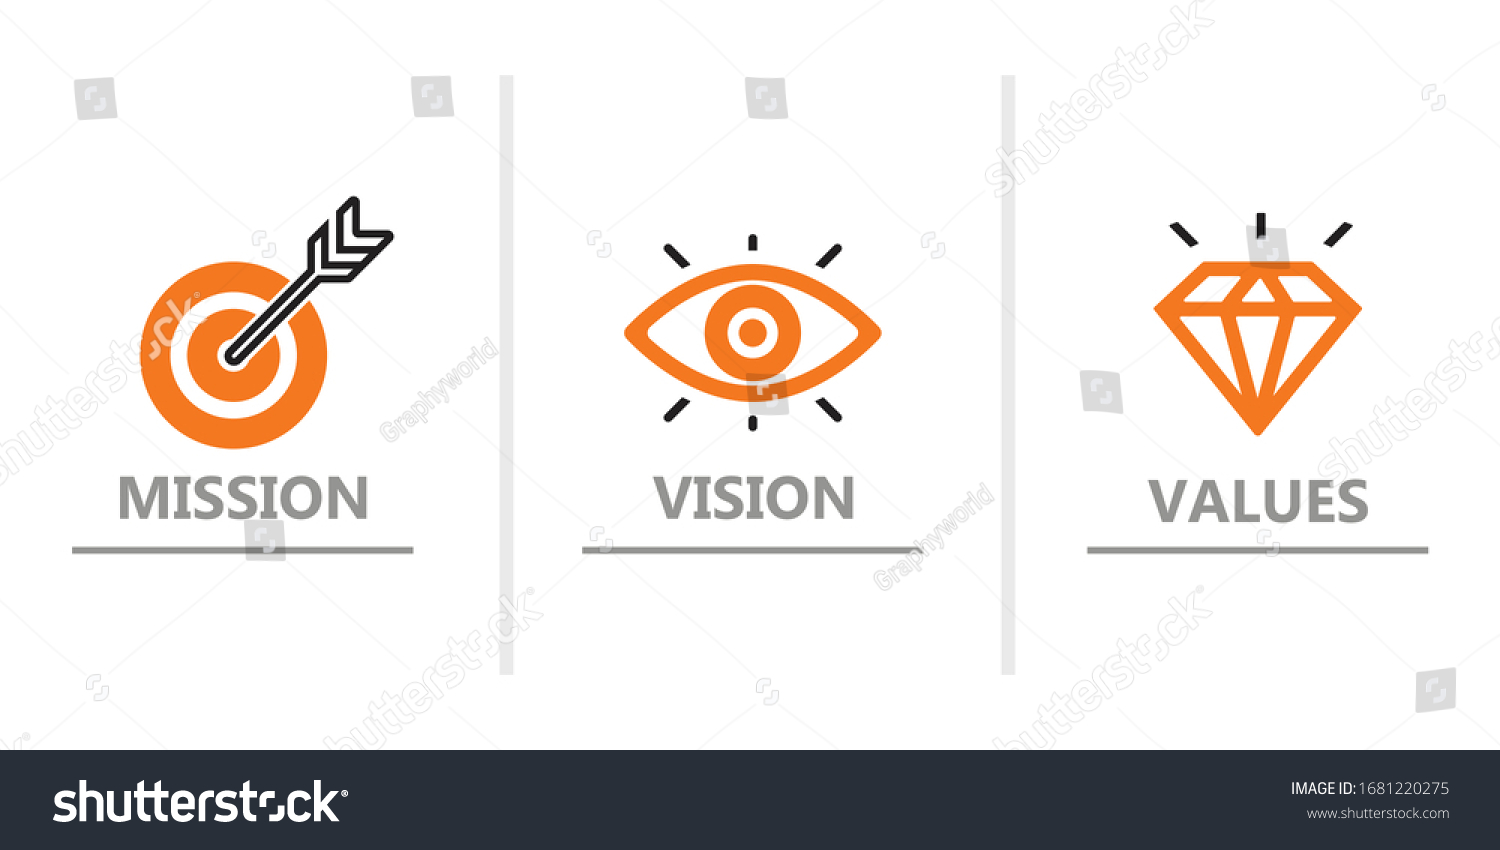 Mission Vision Values Web Icon Design Stock Vector (Royalty Free ...